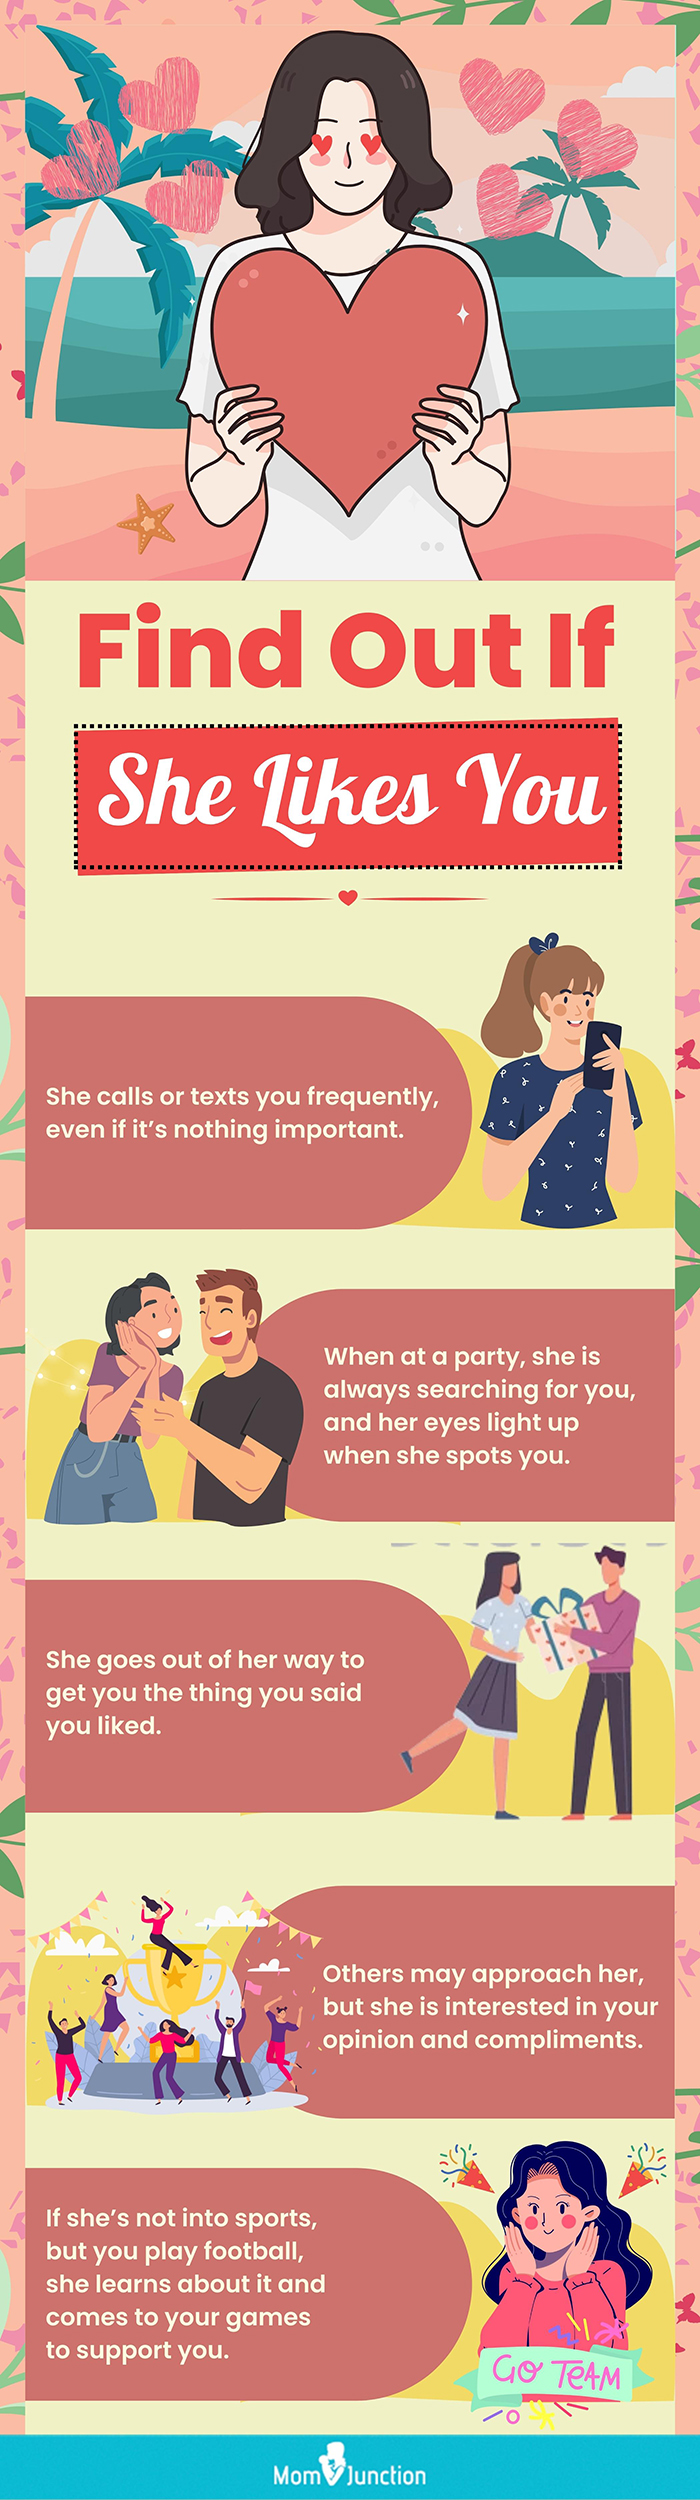 signs if she like you [infographic]